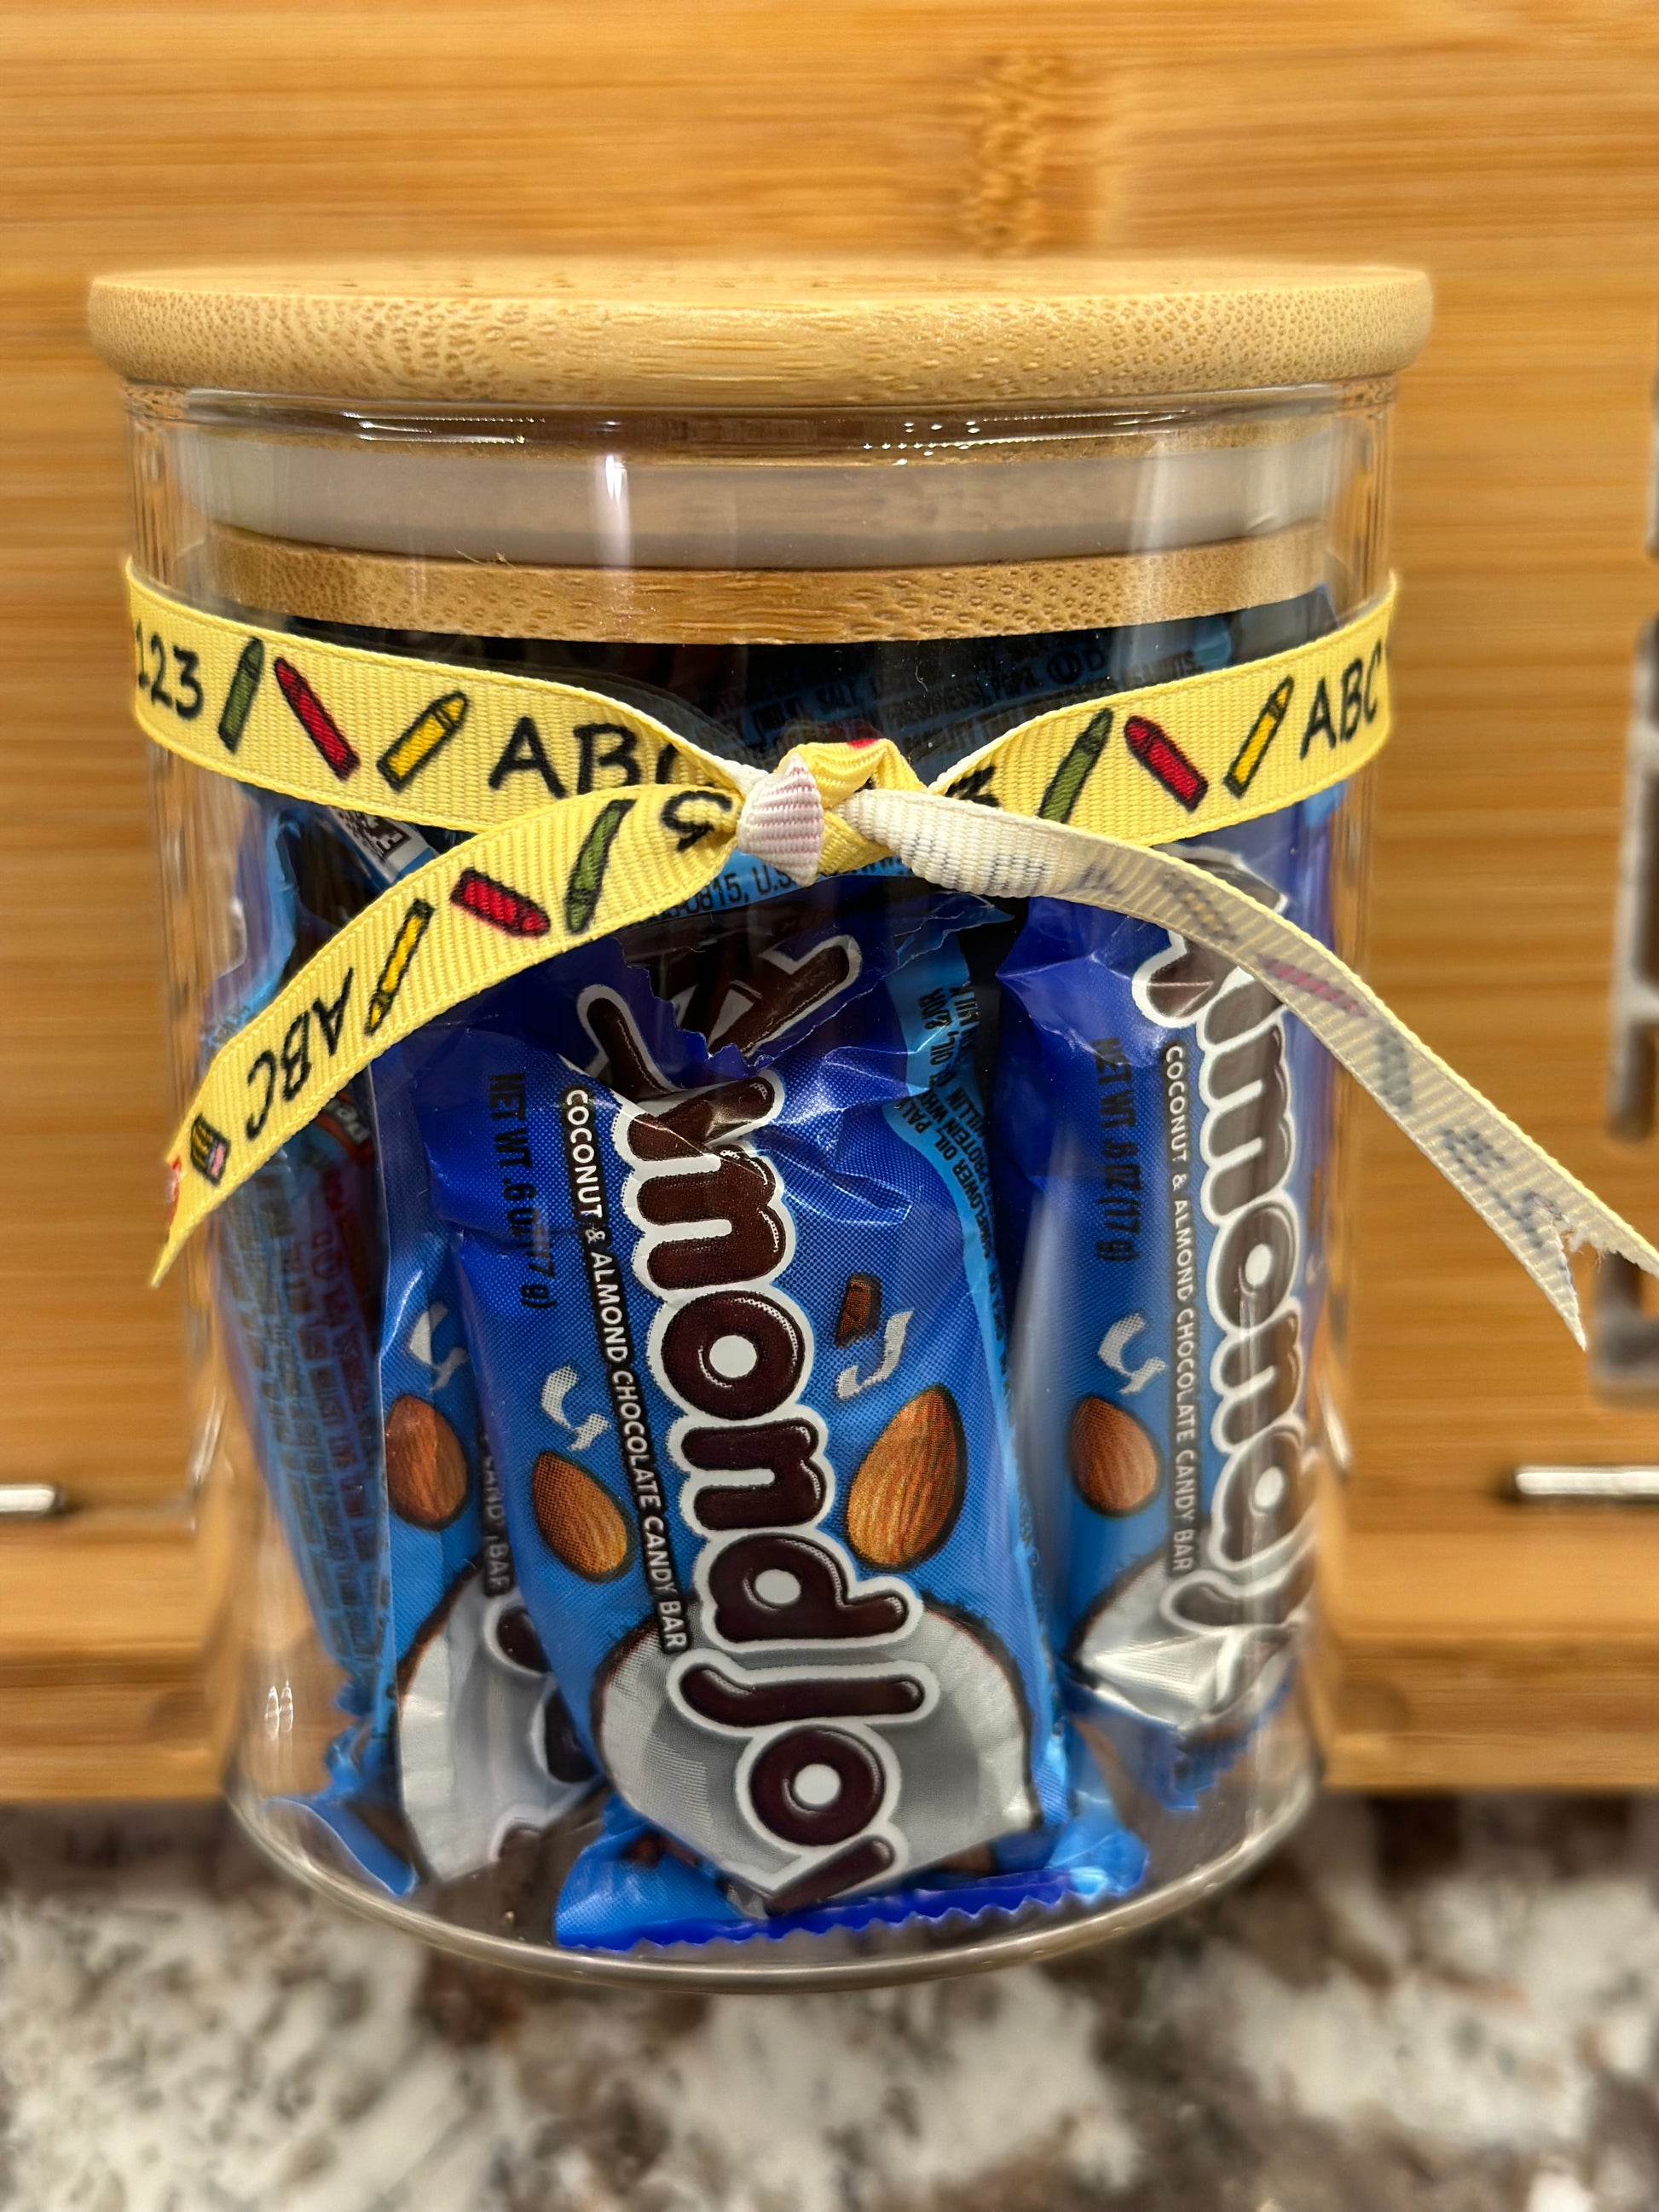 It’s Been A Joy Being In Your Class!/Almond Joy Candy 